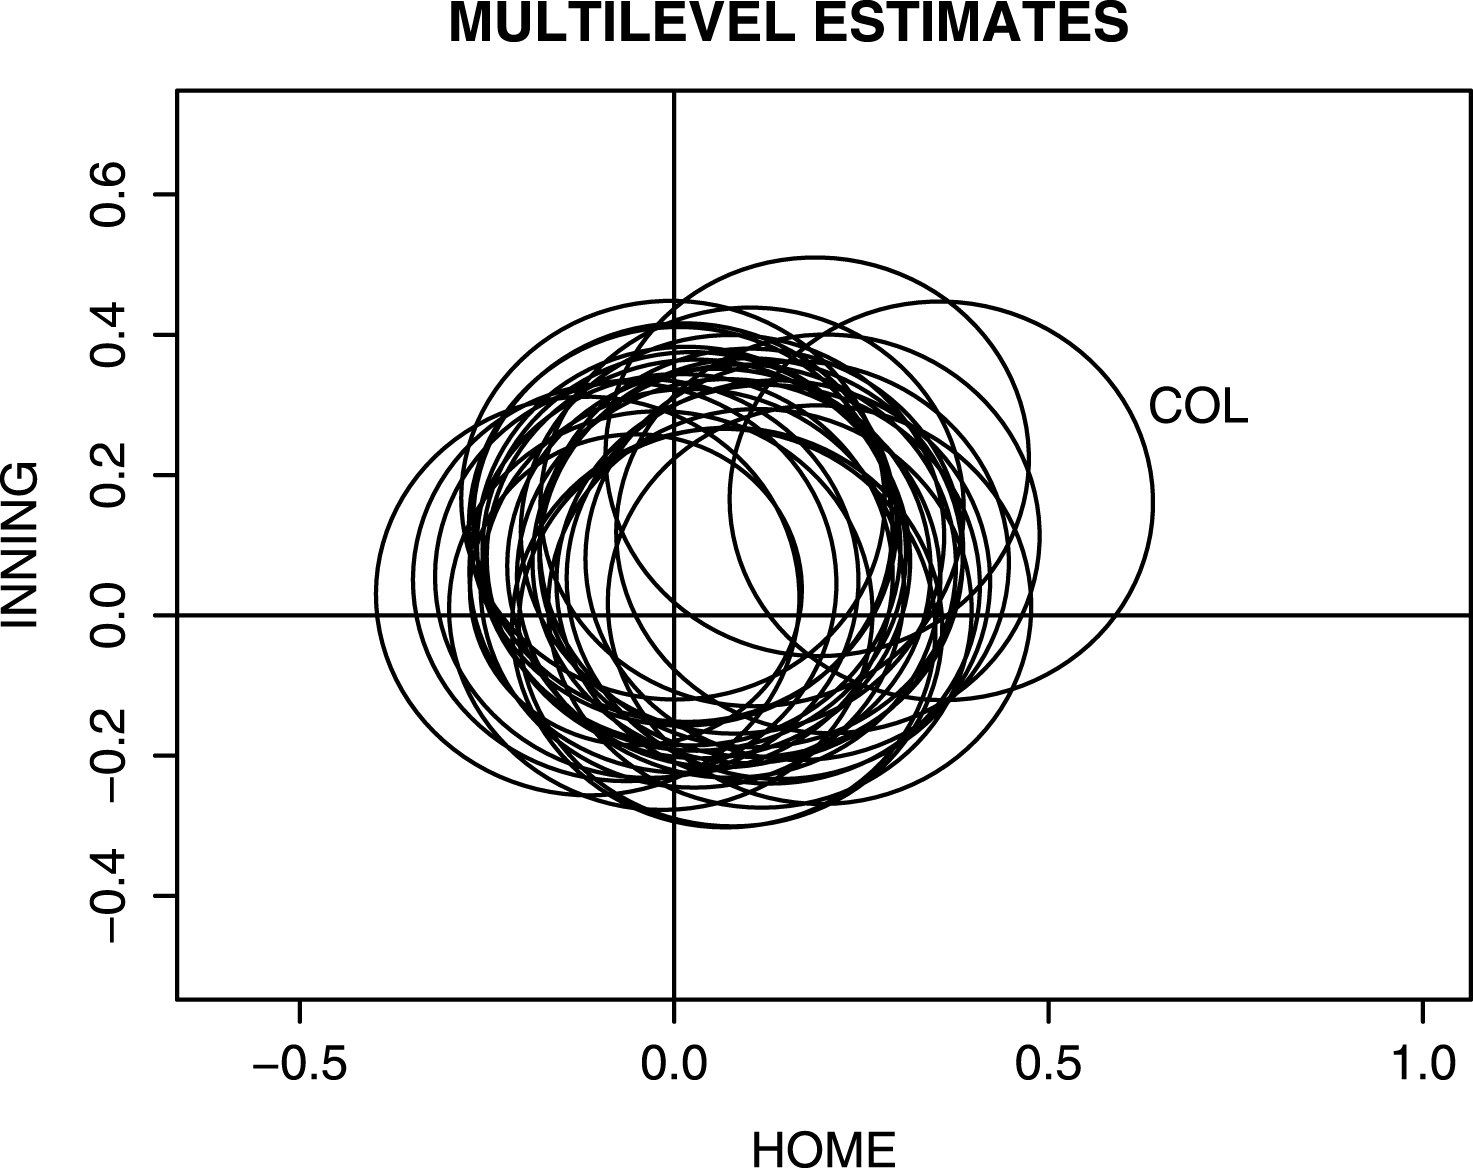 Multilevel ordinal regresssion model estimates of home/away and early/late inning effects for 2013 season. Each ellipse represents the location of a 95% confidence region and the region corresponding to Colorado is labelled.